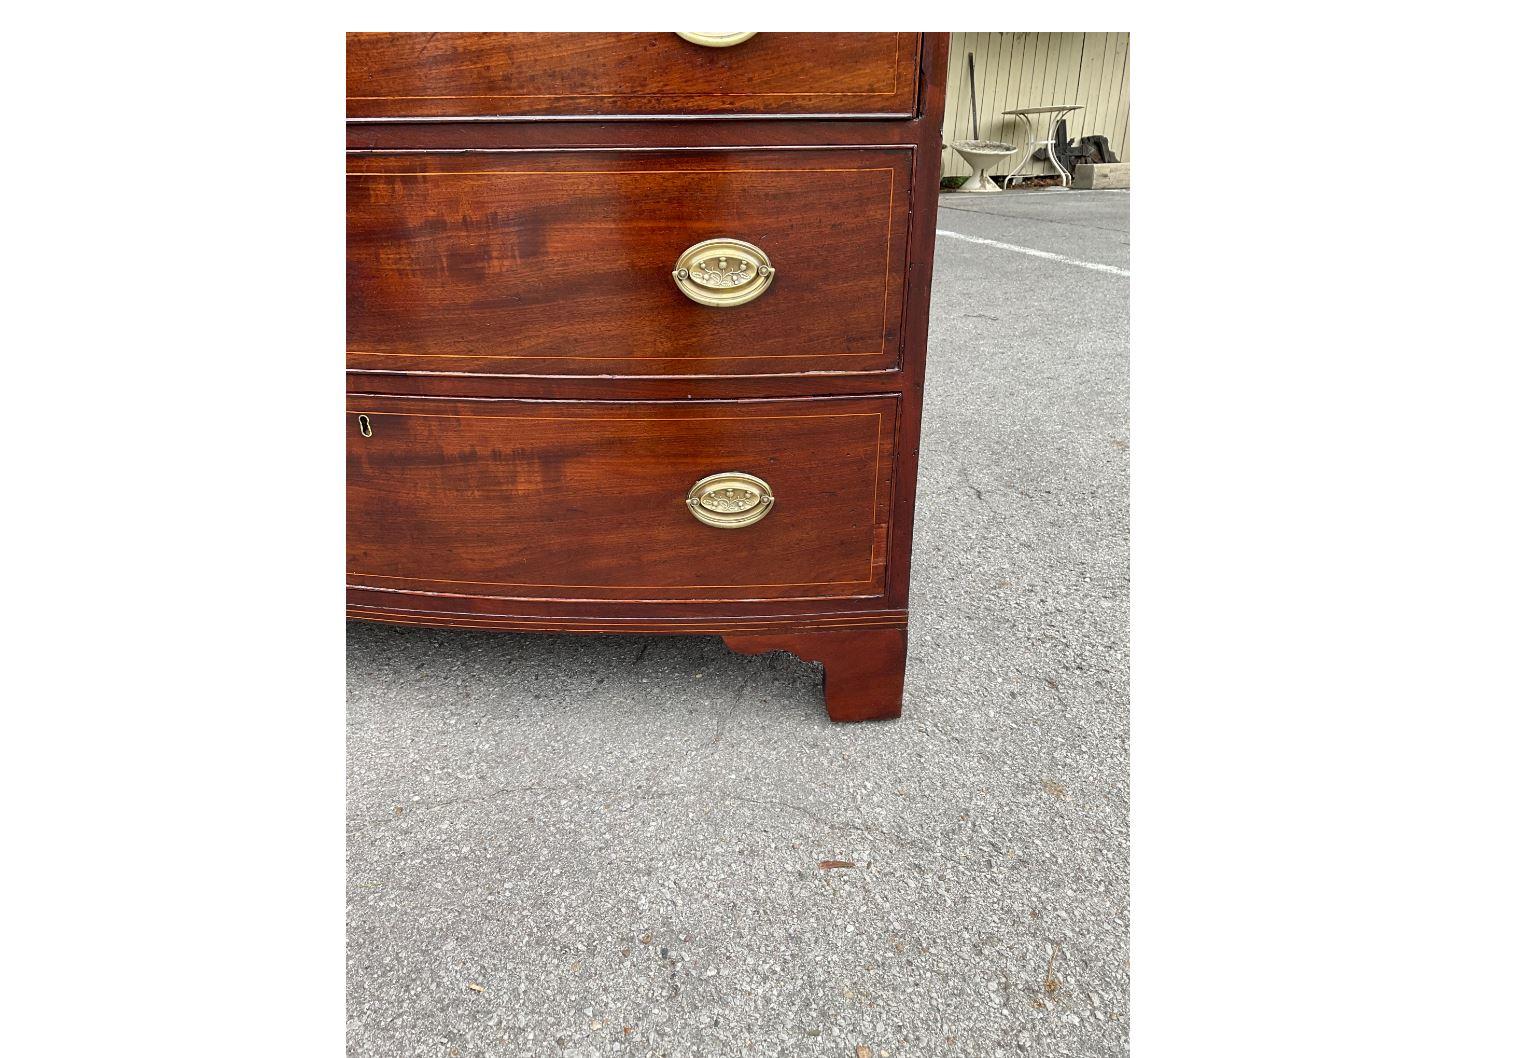 This is a beautiful American bow front chest with a string inlay and beautiful character in the wood. It’s recently been polished which helps show the amazing patina. All drawers are in excellent condition and slide perfectly. 